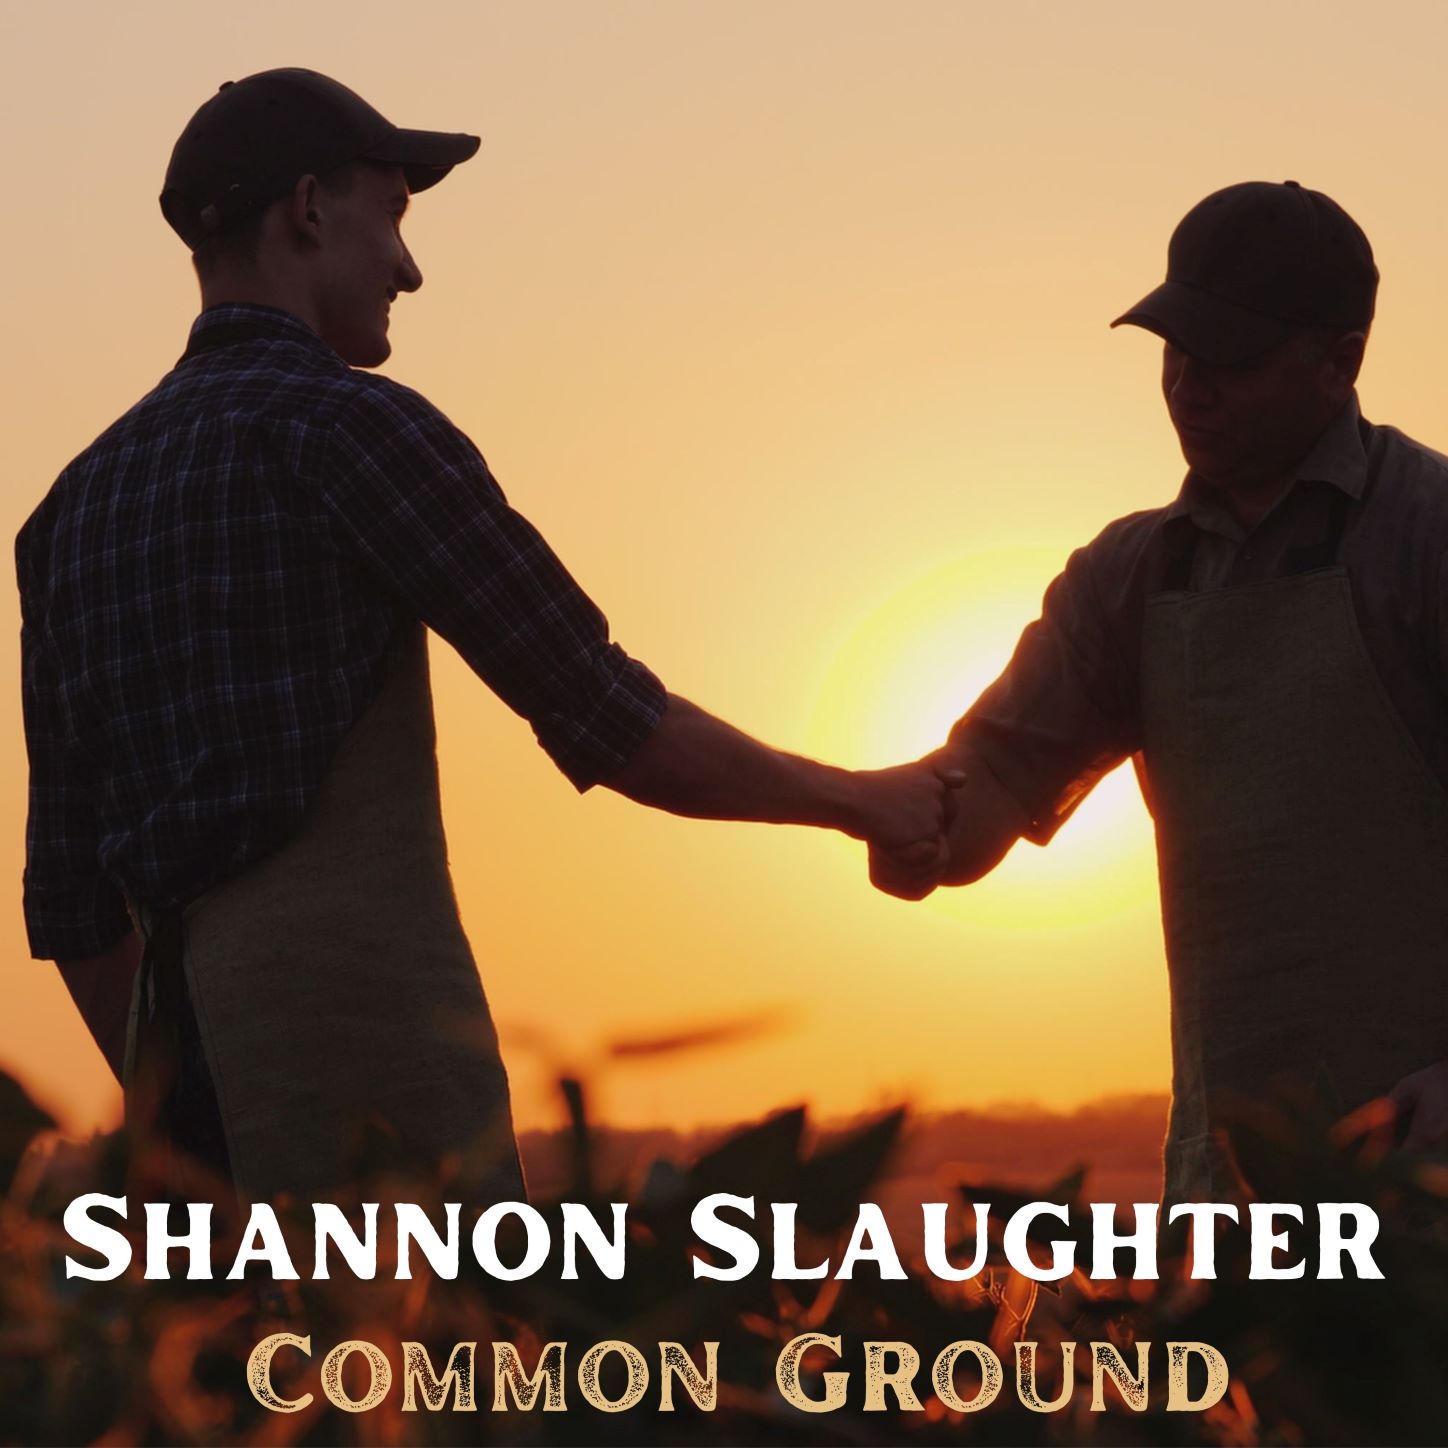 Shannon Slaughter Common Ground